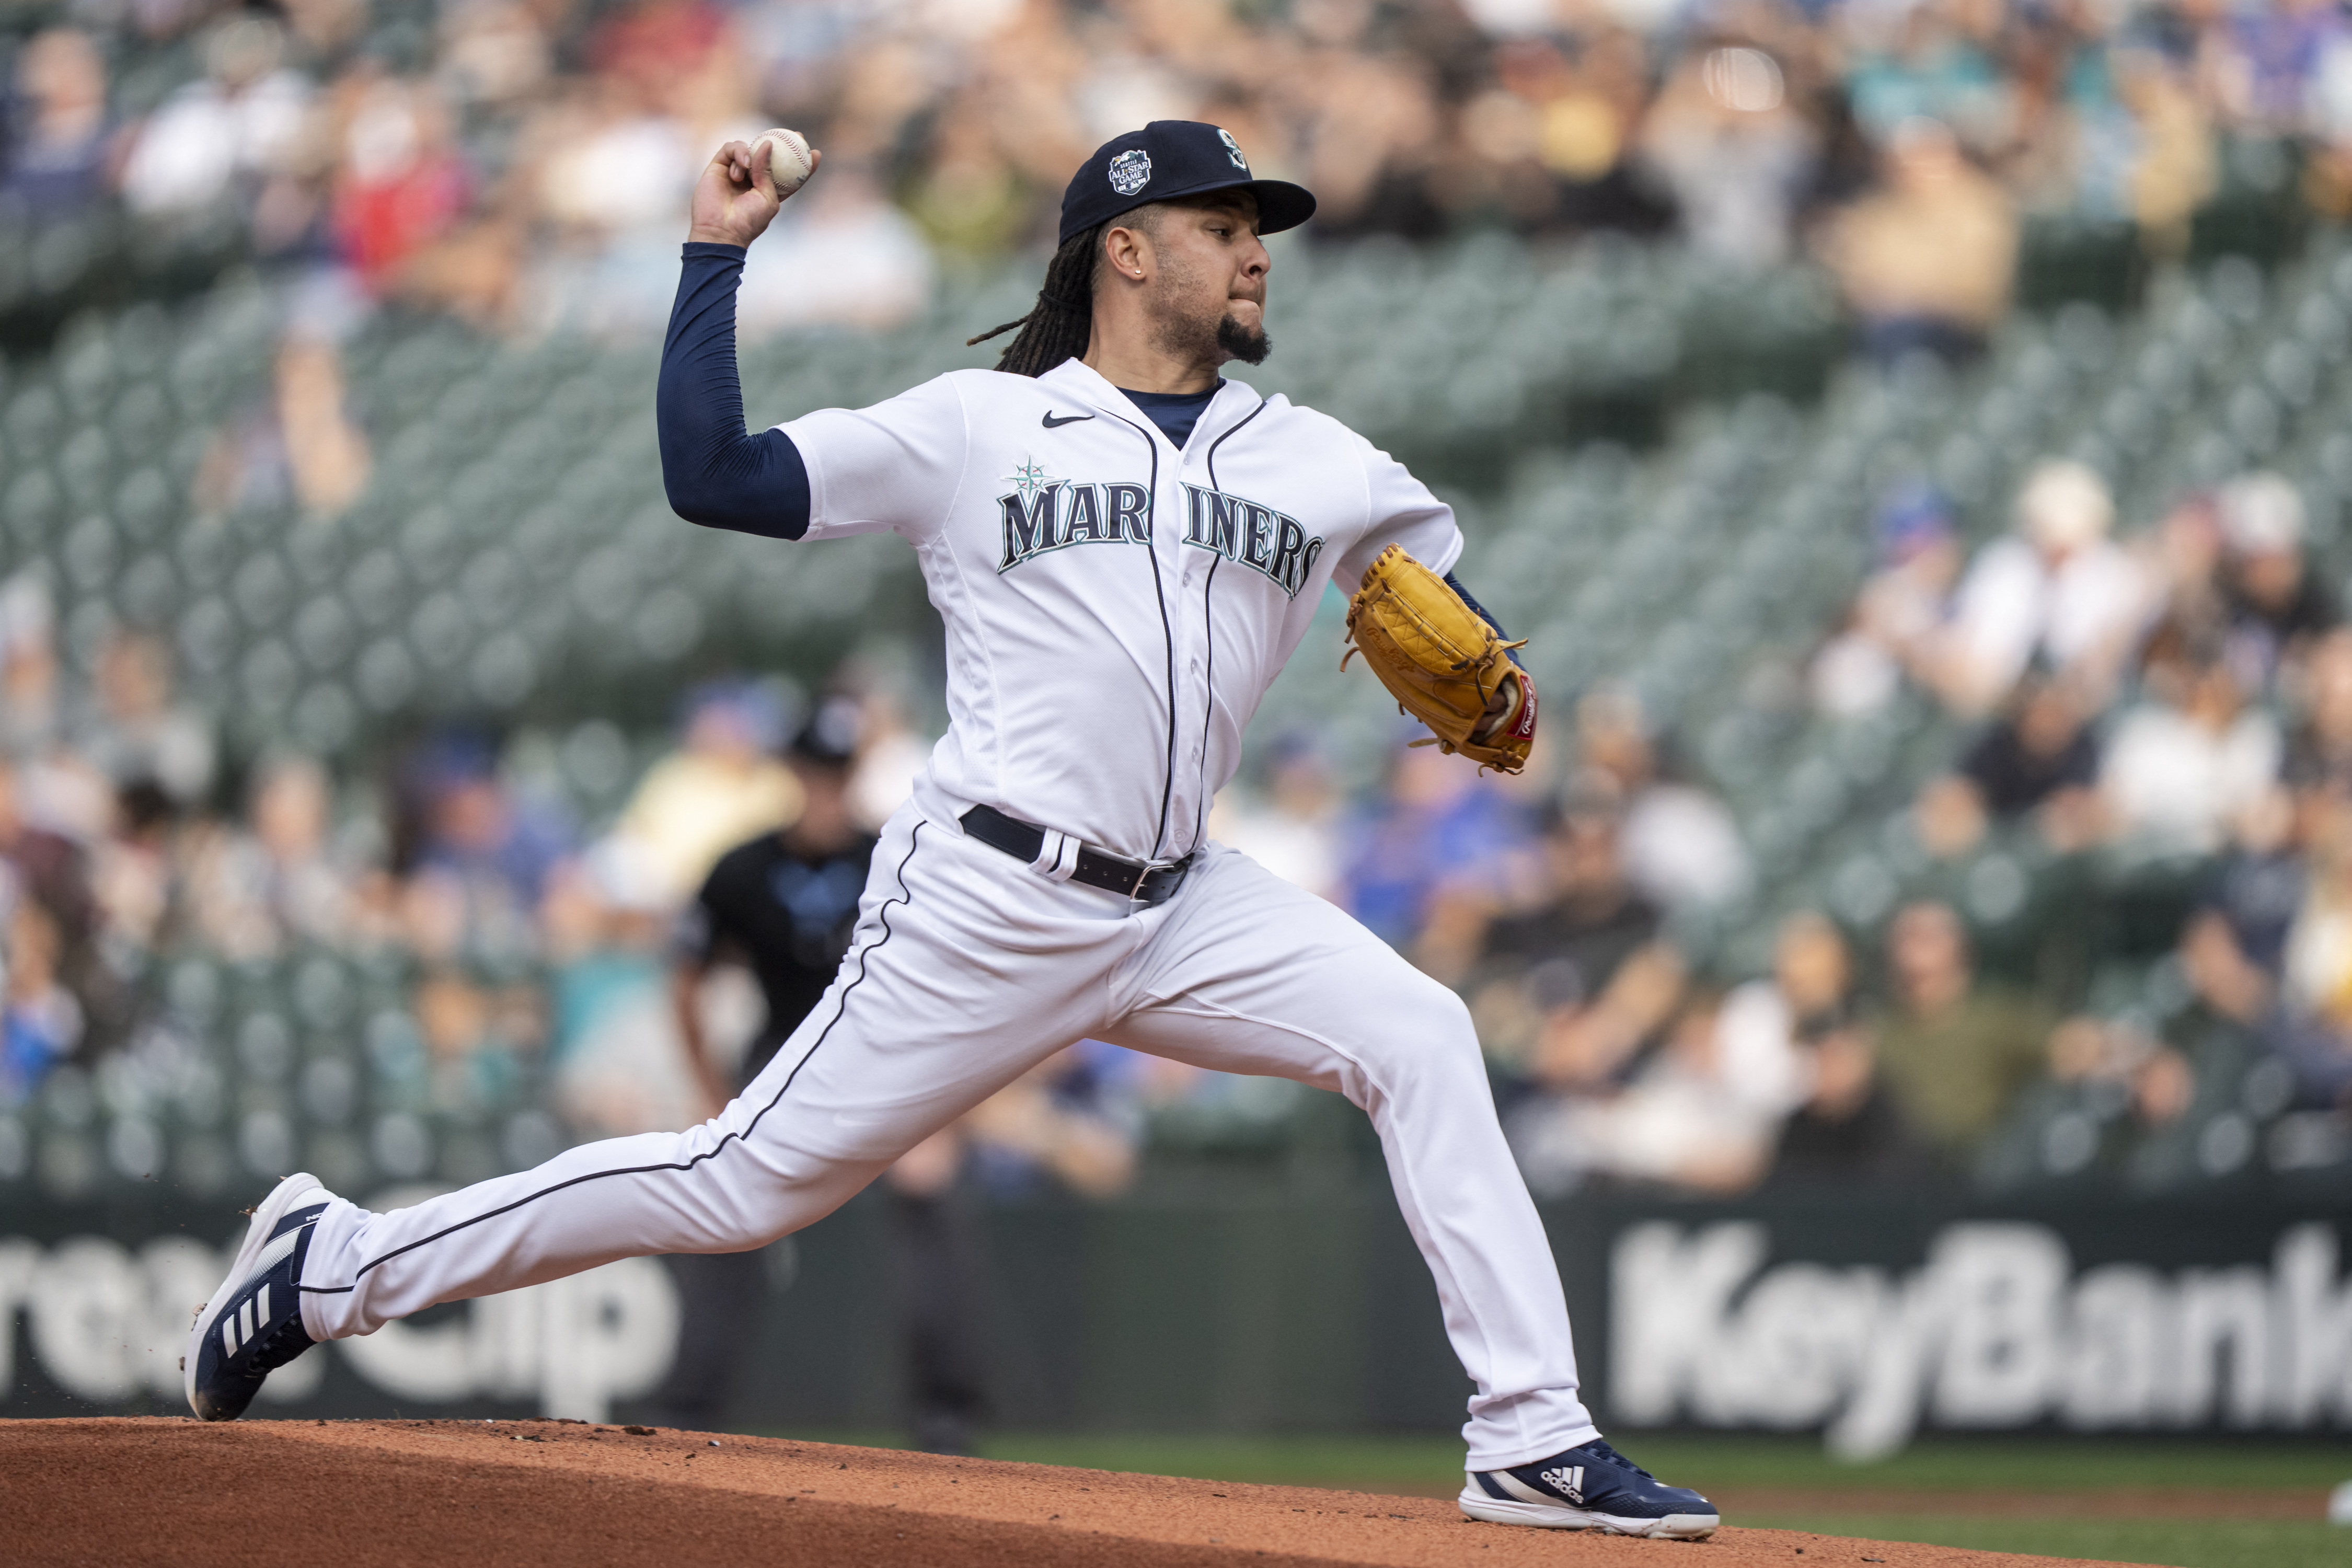 Luis Castillo to pitch Game 2 of Mariners-Astros ALDS